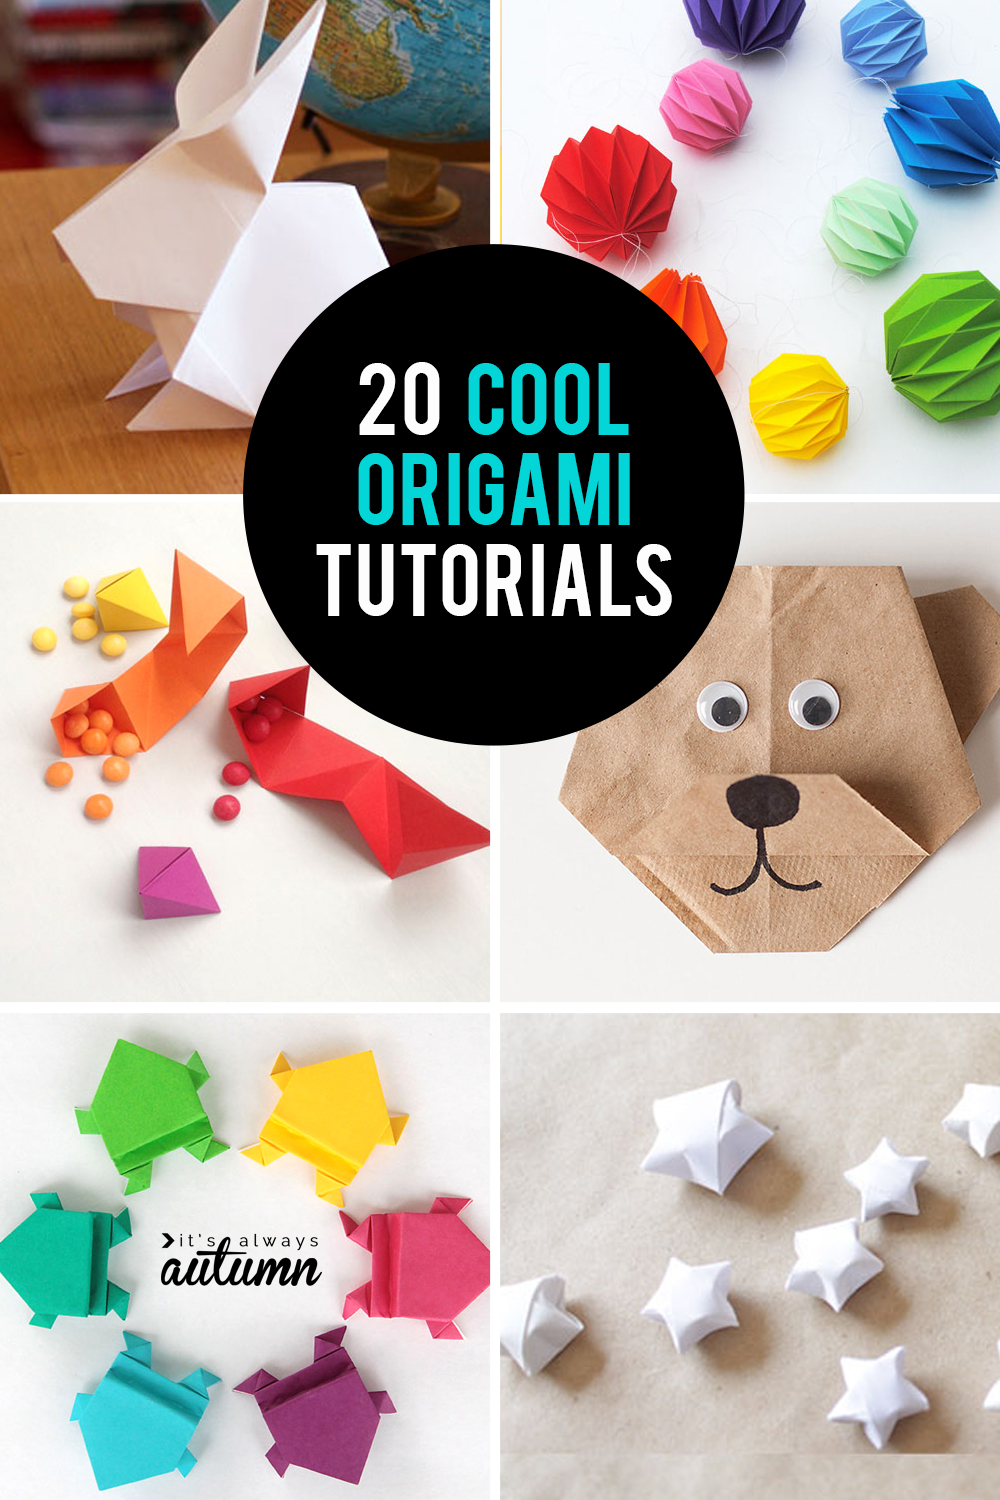 20 Cool Origami Tutorials Kids And Adults Will Love It S Always - 20 fun easy cool origami tutorials for kids and adults